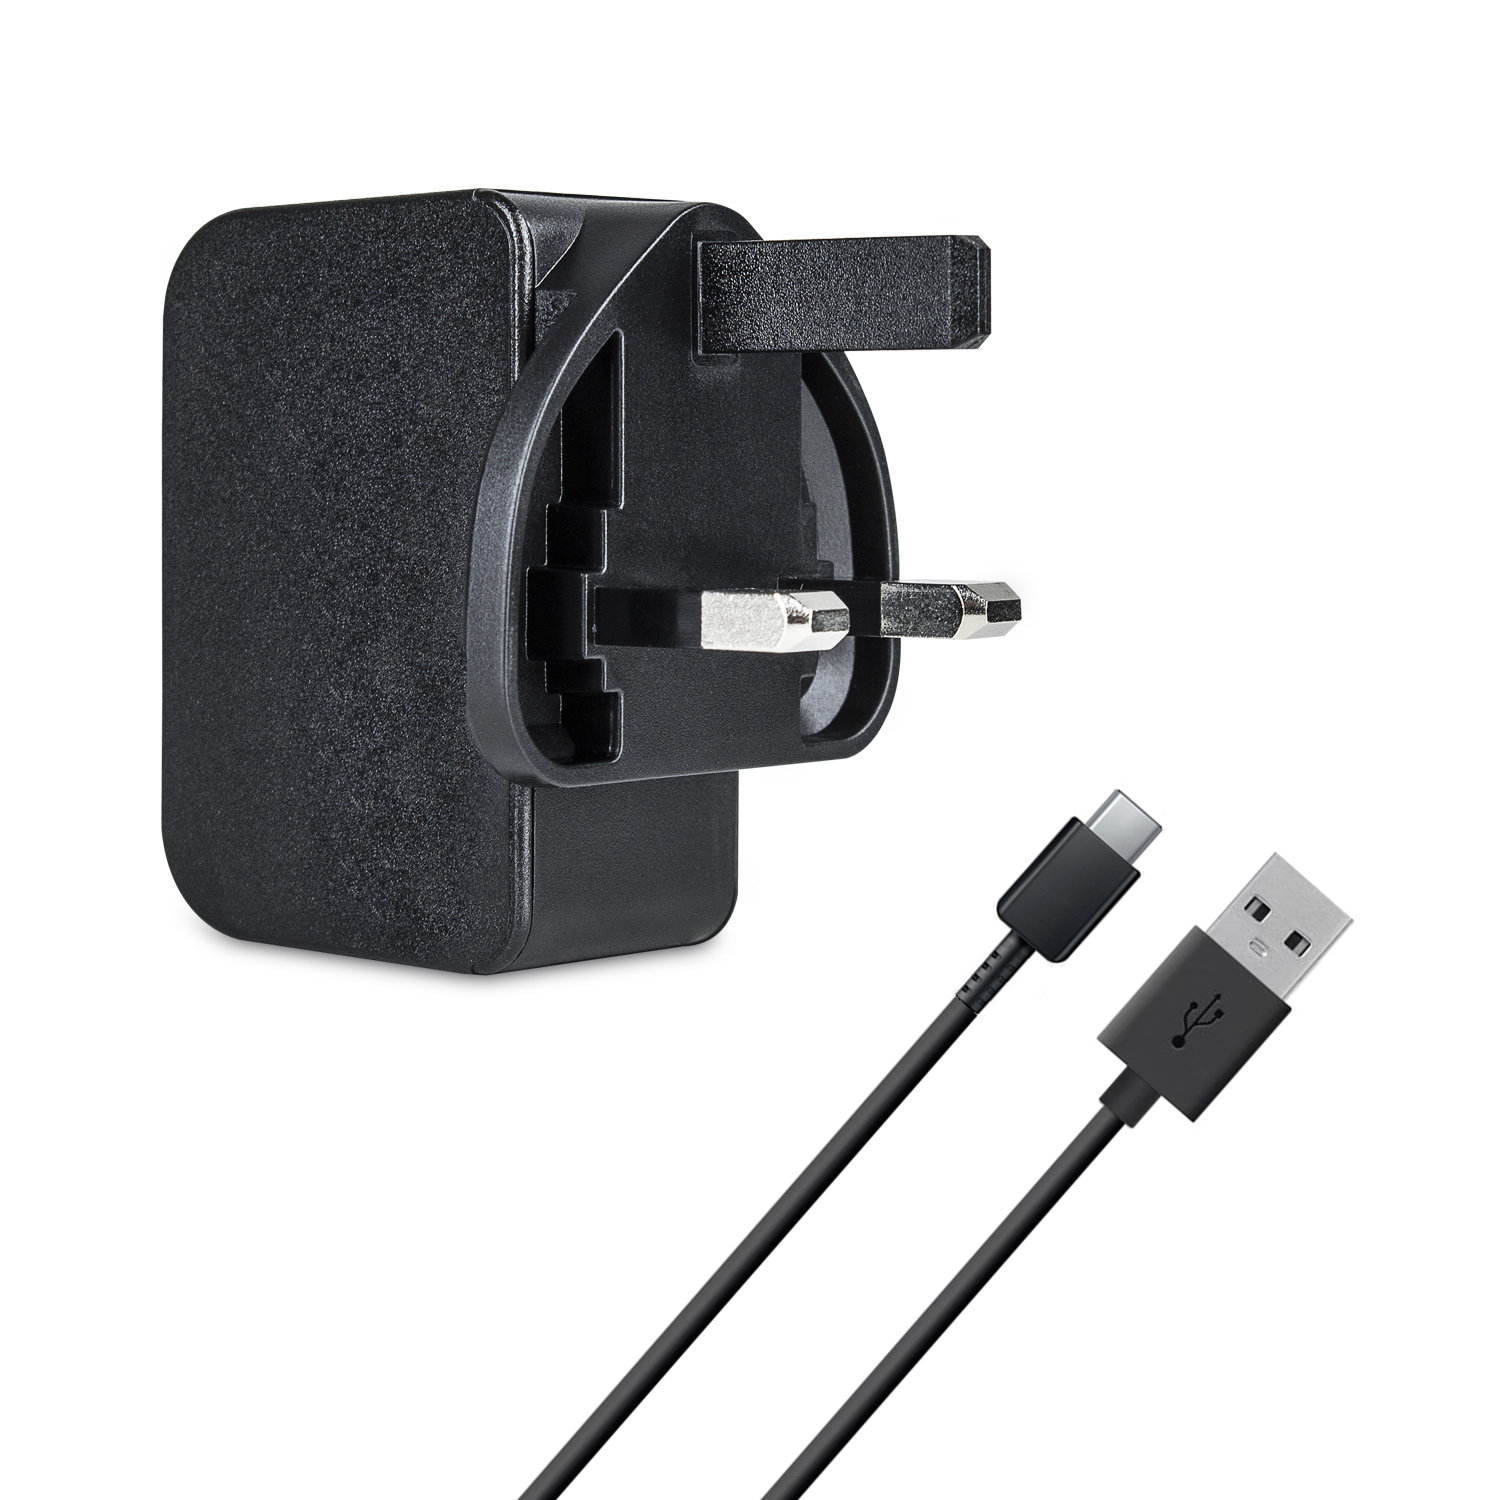 Olixar High Power Motorola One USB-C Mains Charger & Cable